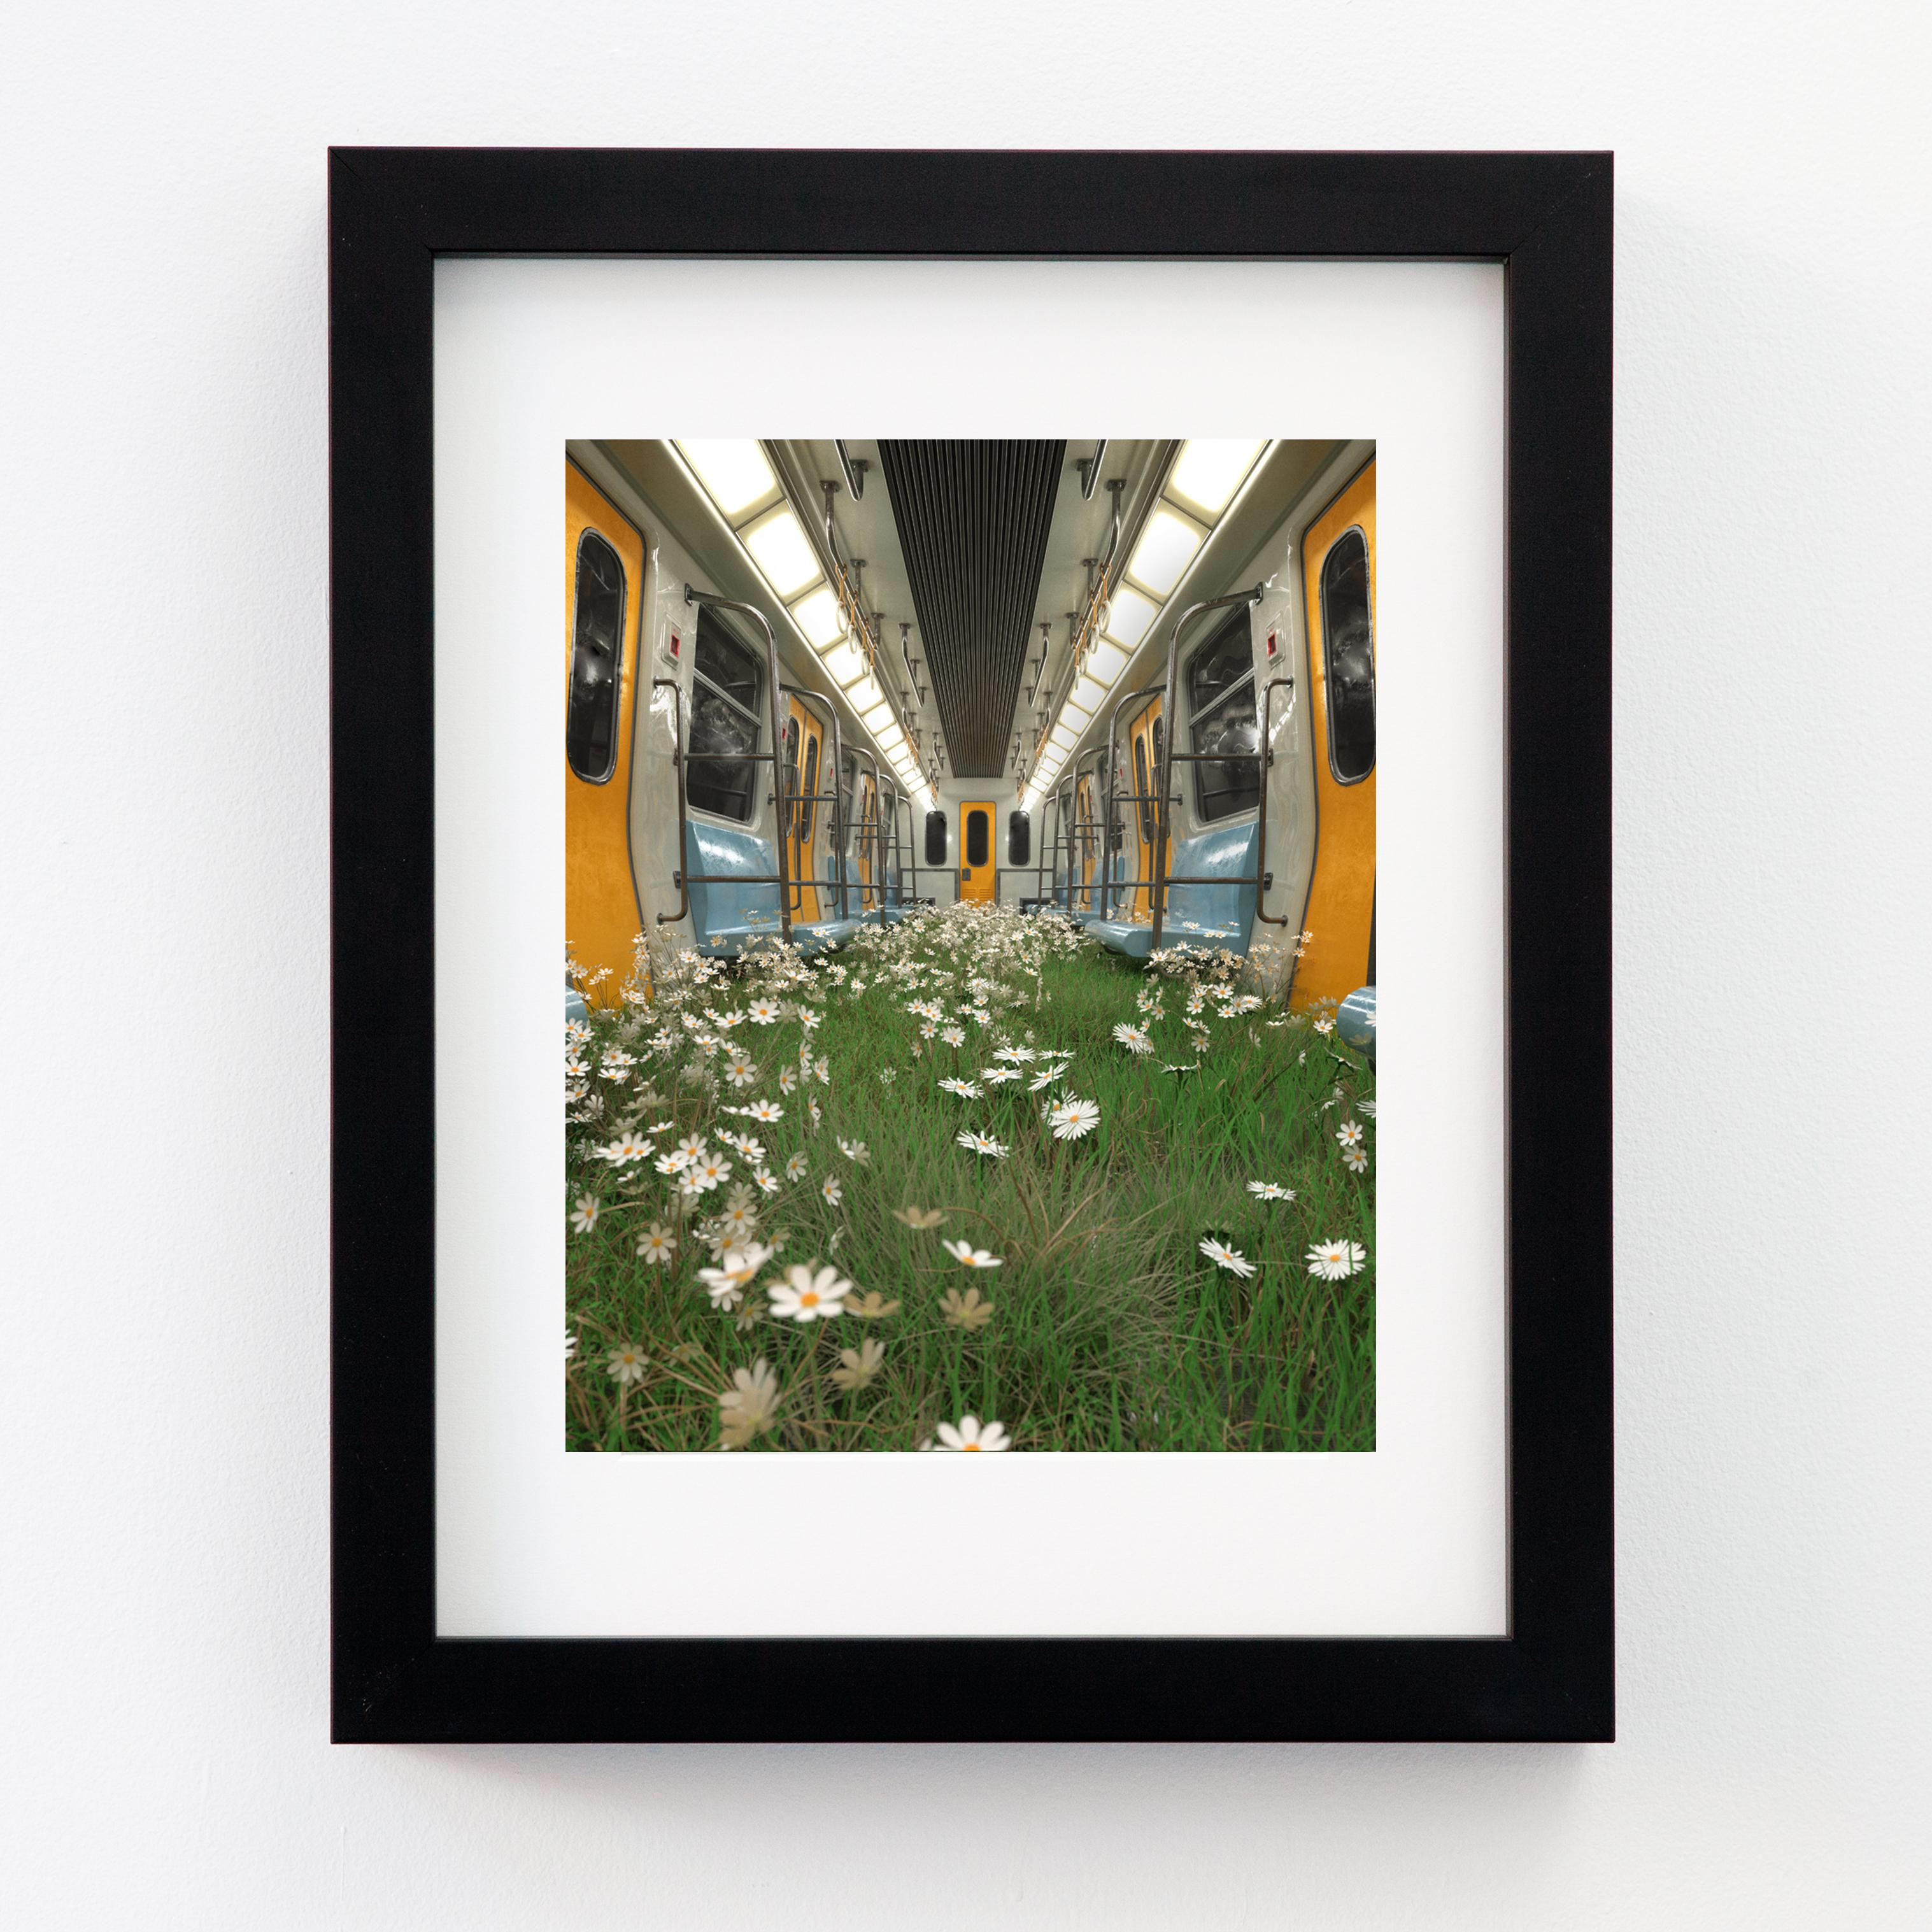 THIS PIECE IS AVAILABLE FRAMED.  Please reach out to the gallery for more information.

ABOUT THIS ARTIST: Timo Helgert is a German artist, best known for his viral virtual installations. His work draws inspiration from classical escapism and draws